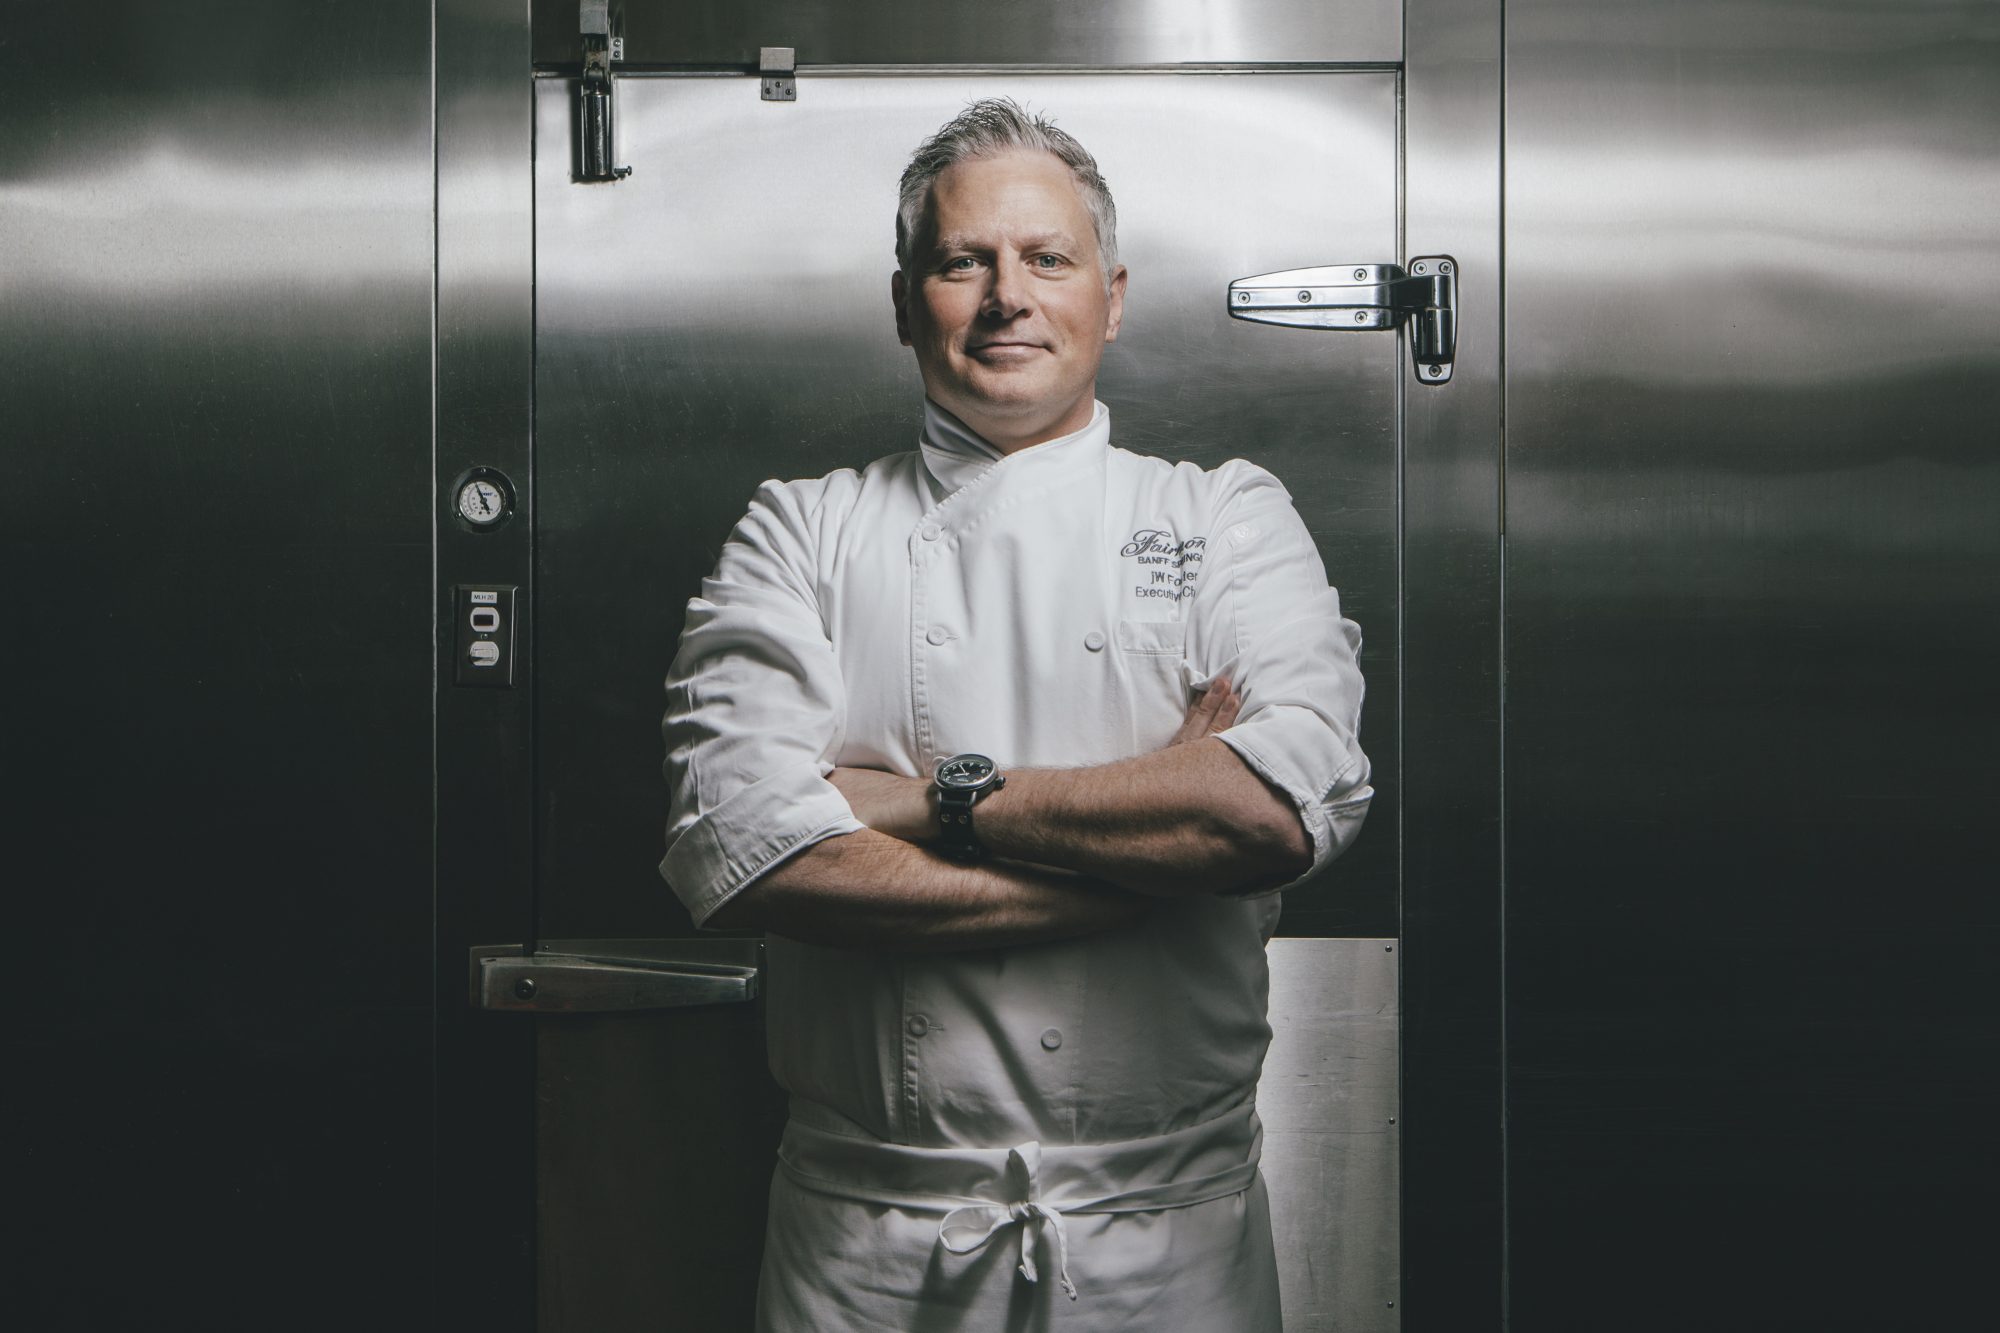 Executive Chef jW Foster